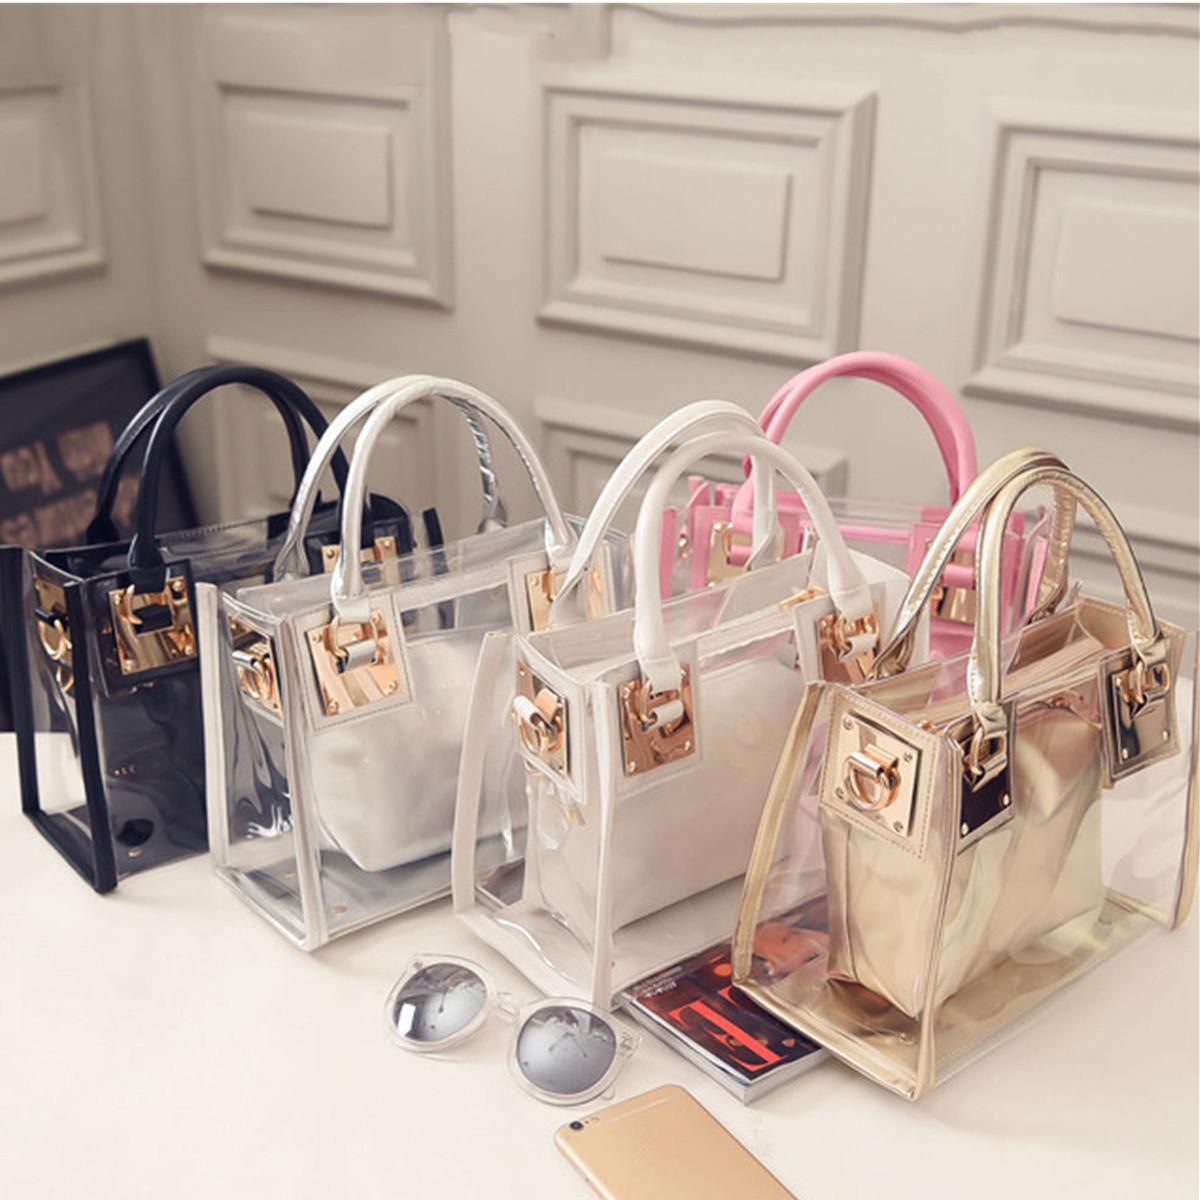 THEE Luxury Transparent Handbag Bag Clear Jelly Purse Women Clutch Tote Sweet 